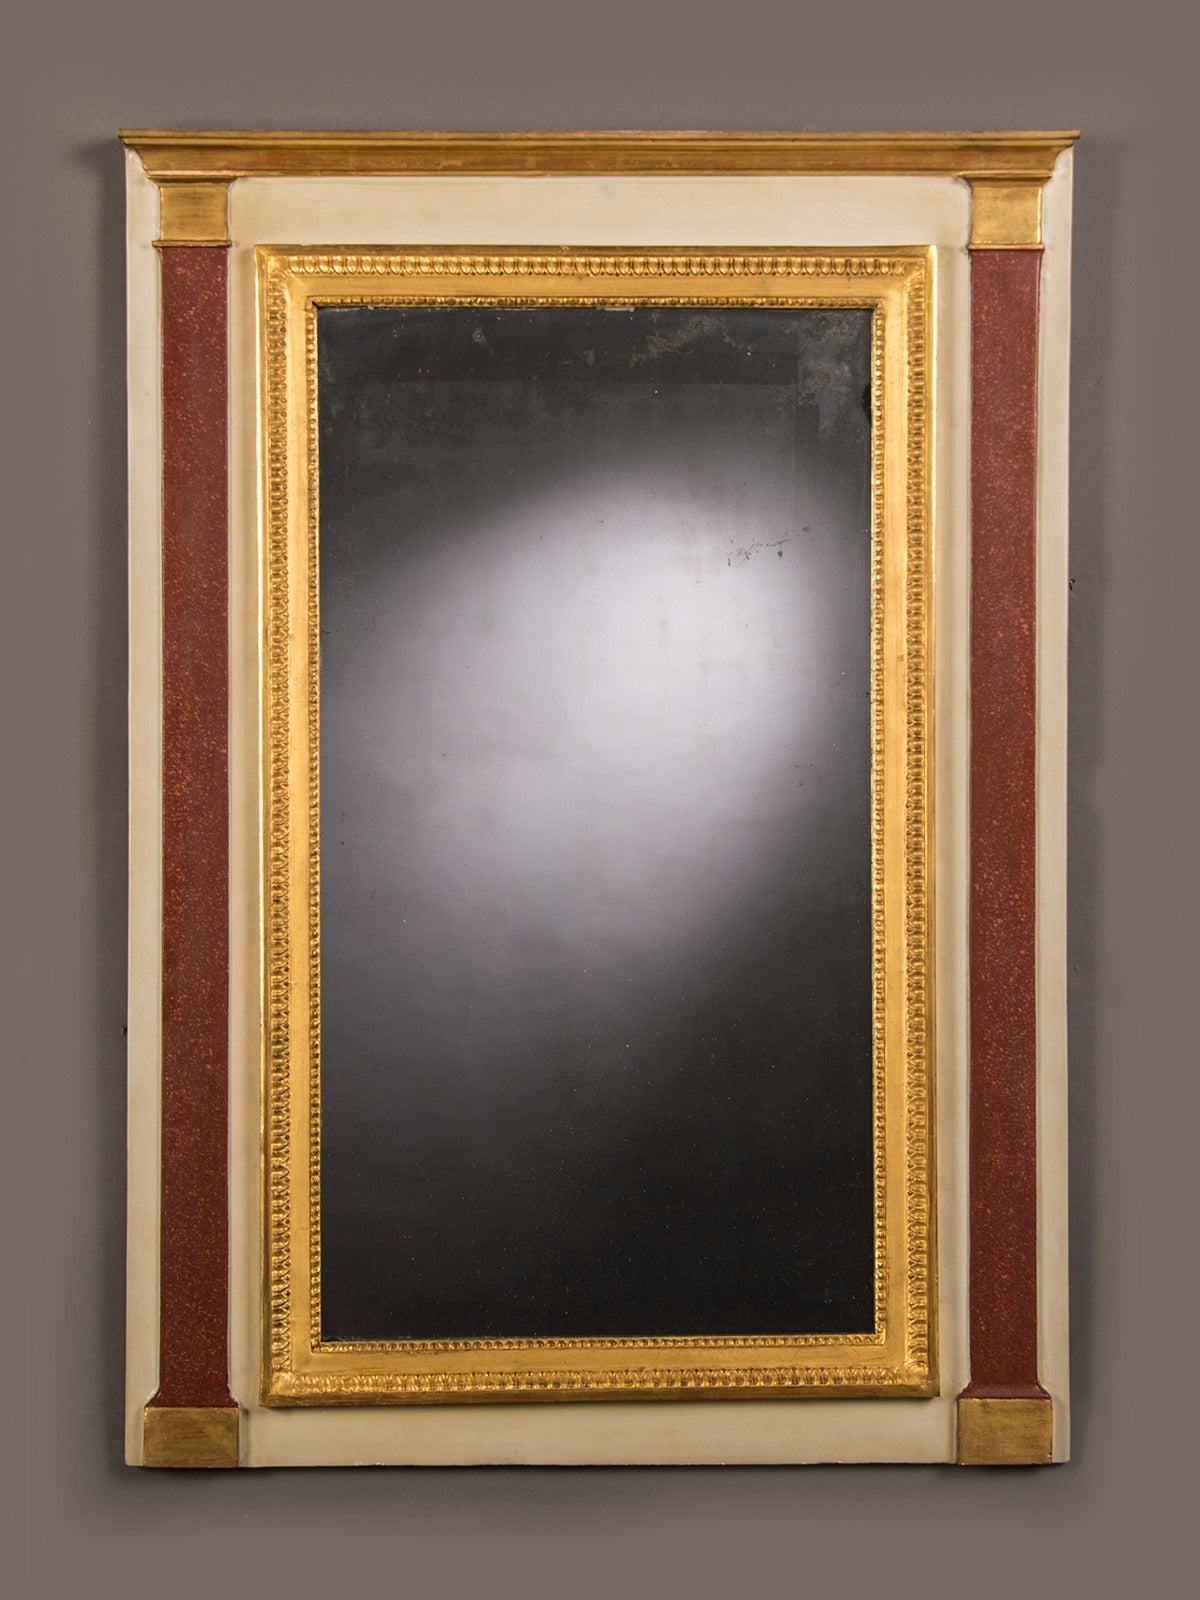 Receive our new selections direct from 1stdibs by email each week. Please click “Follow Dealer” button below and see them first!

An antique French Directoire period painted and gold leaf frame circa 1800 surrounding the original mirror glass that